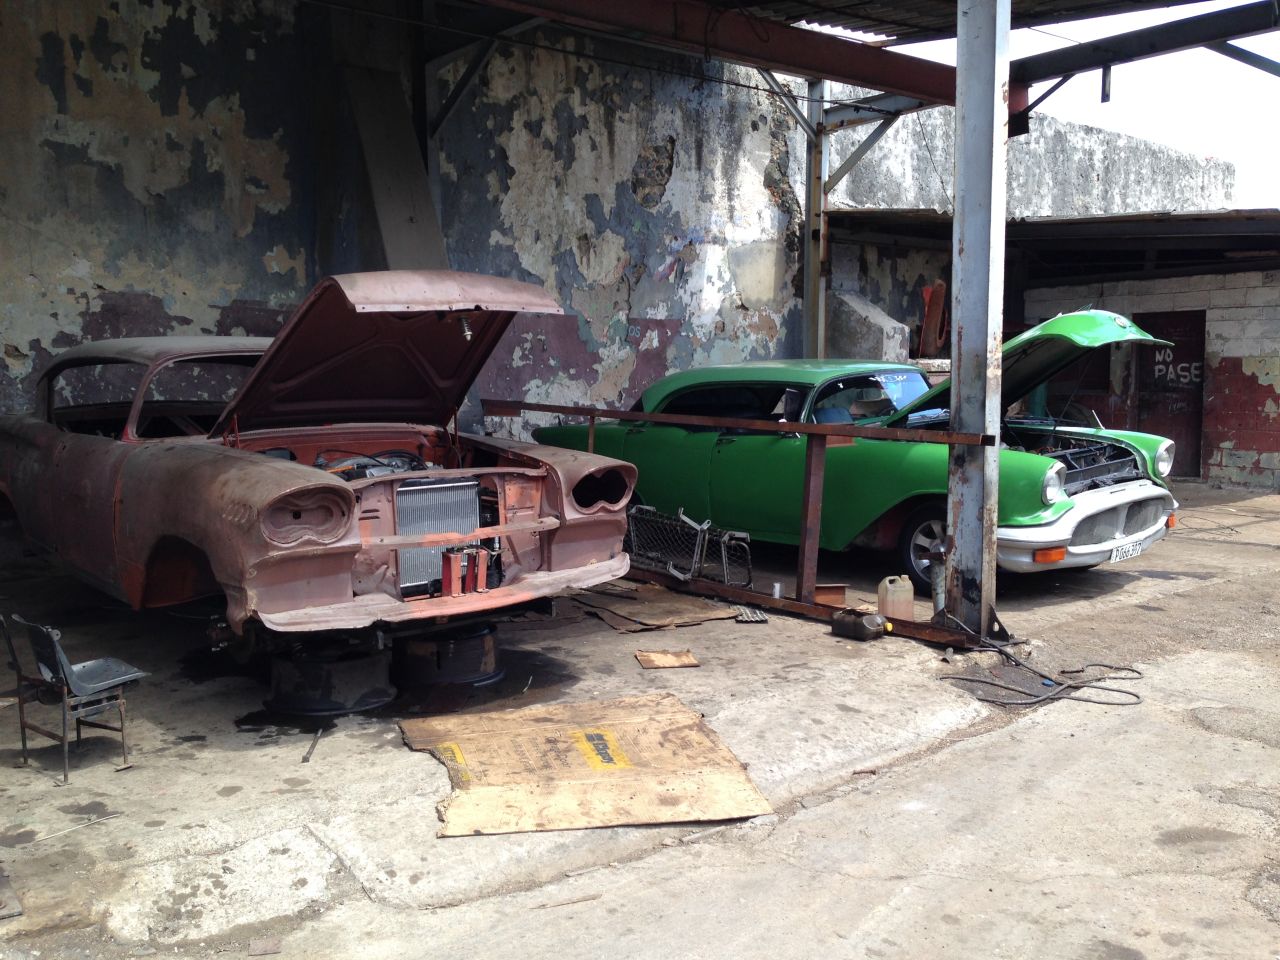 In other instance, restorers rely on Russian or Chinese parts. The less elegant hybrids are nicknamed "Frankensteins."